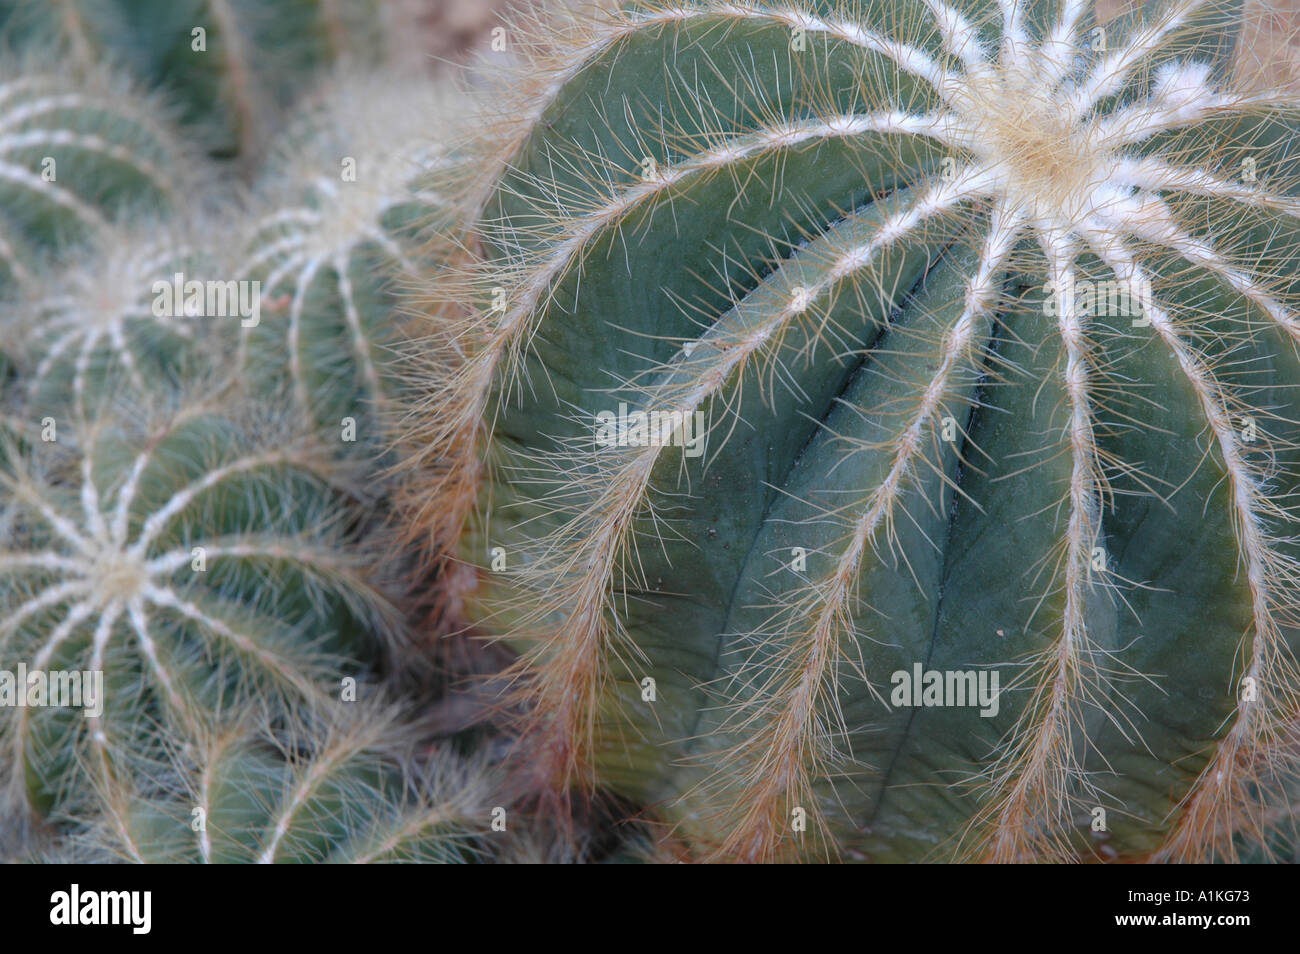 Notocactus magnificus Cactus showing hairy spikes Stock Photo